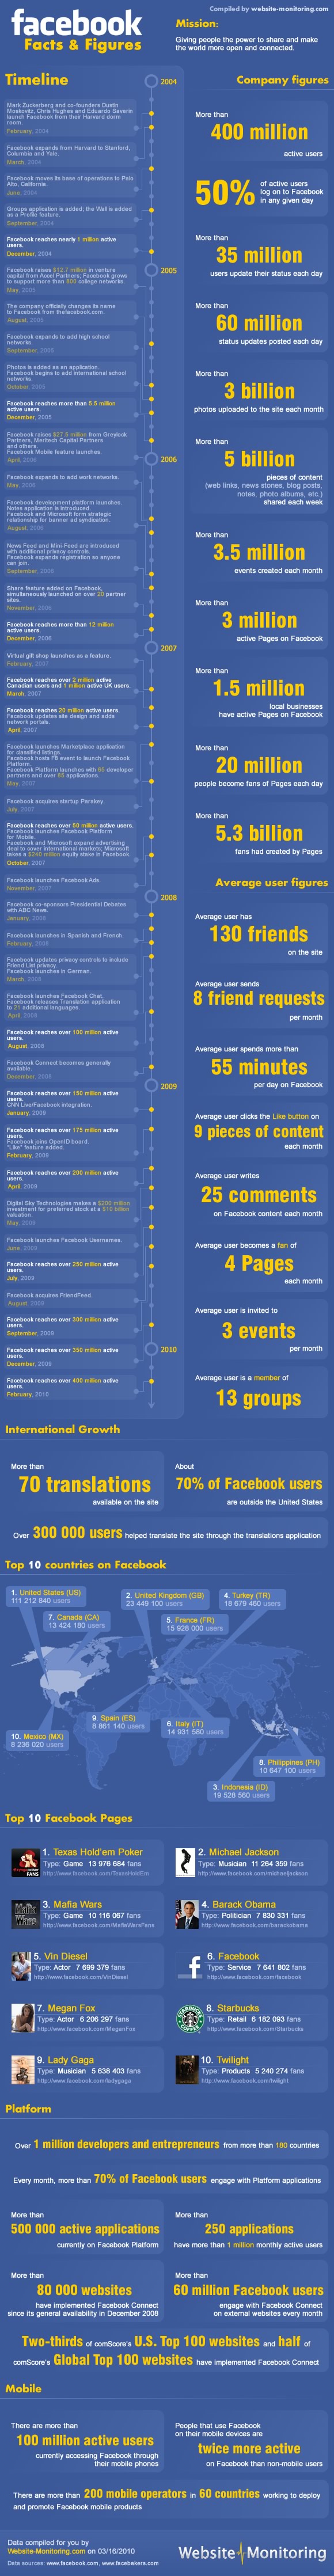 A fat feast of Facebook facts & figures